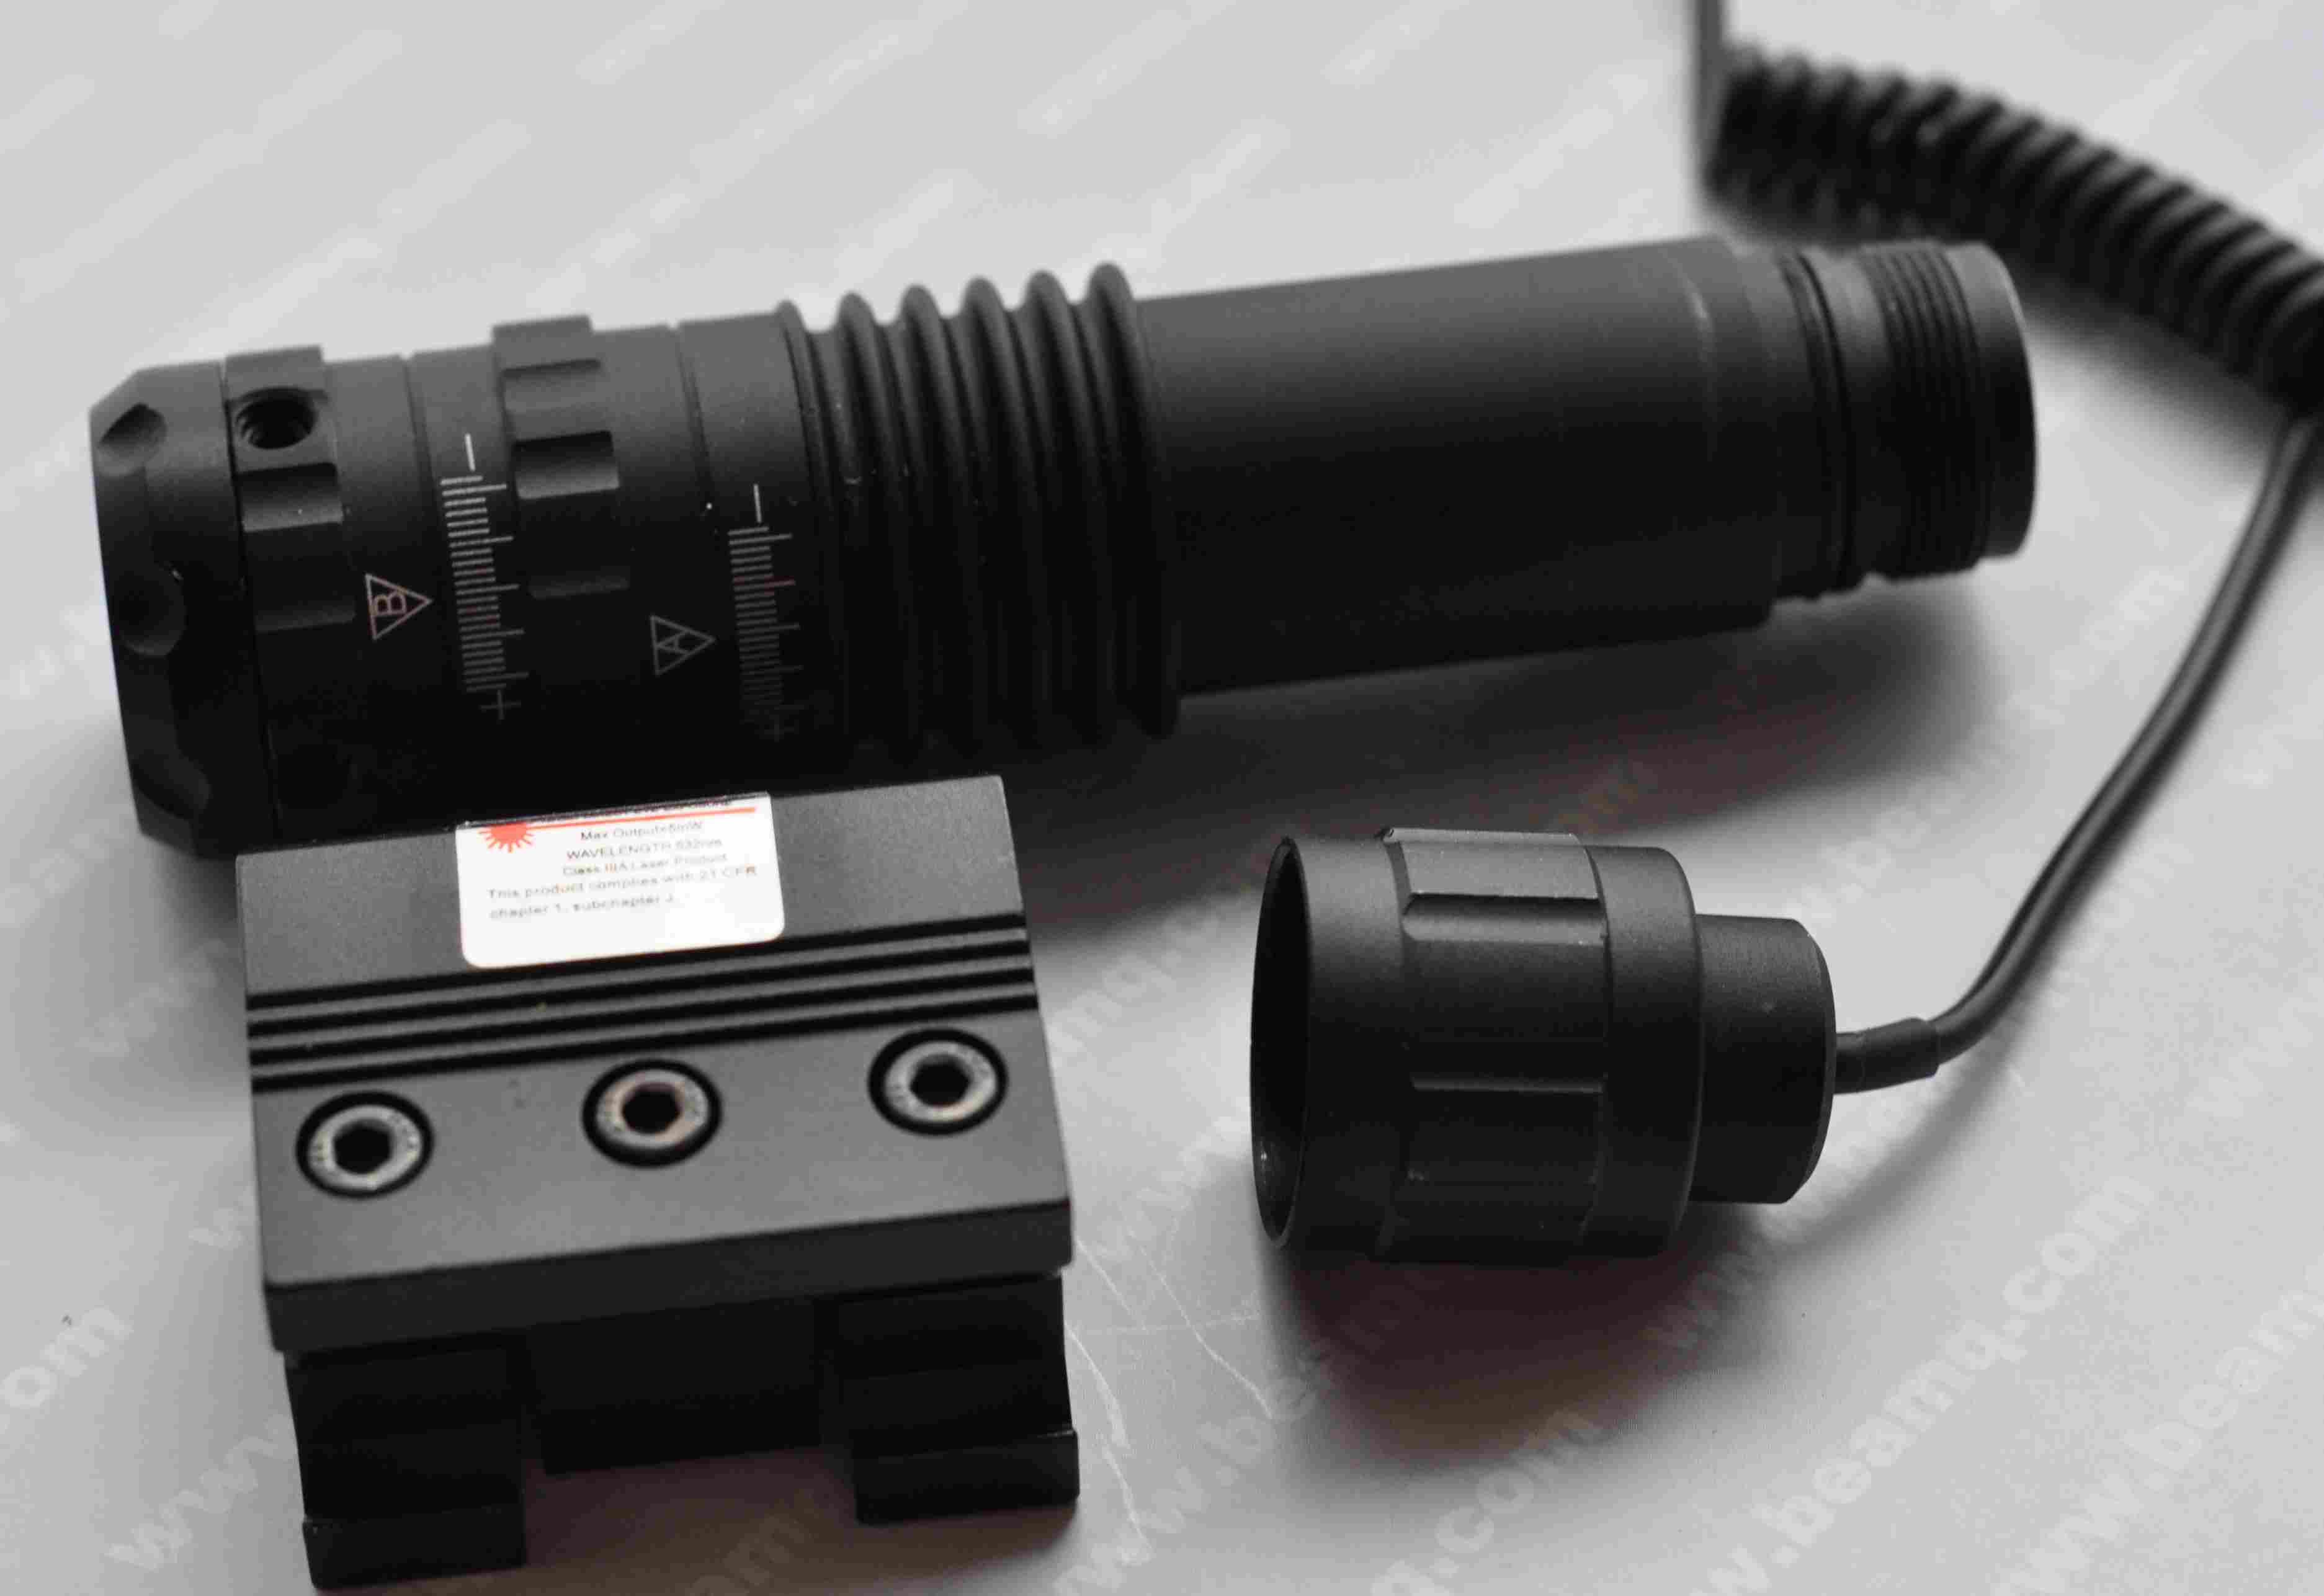 Modal Additional Images for 5mW Laser Gun Sight 001